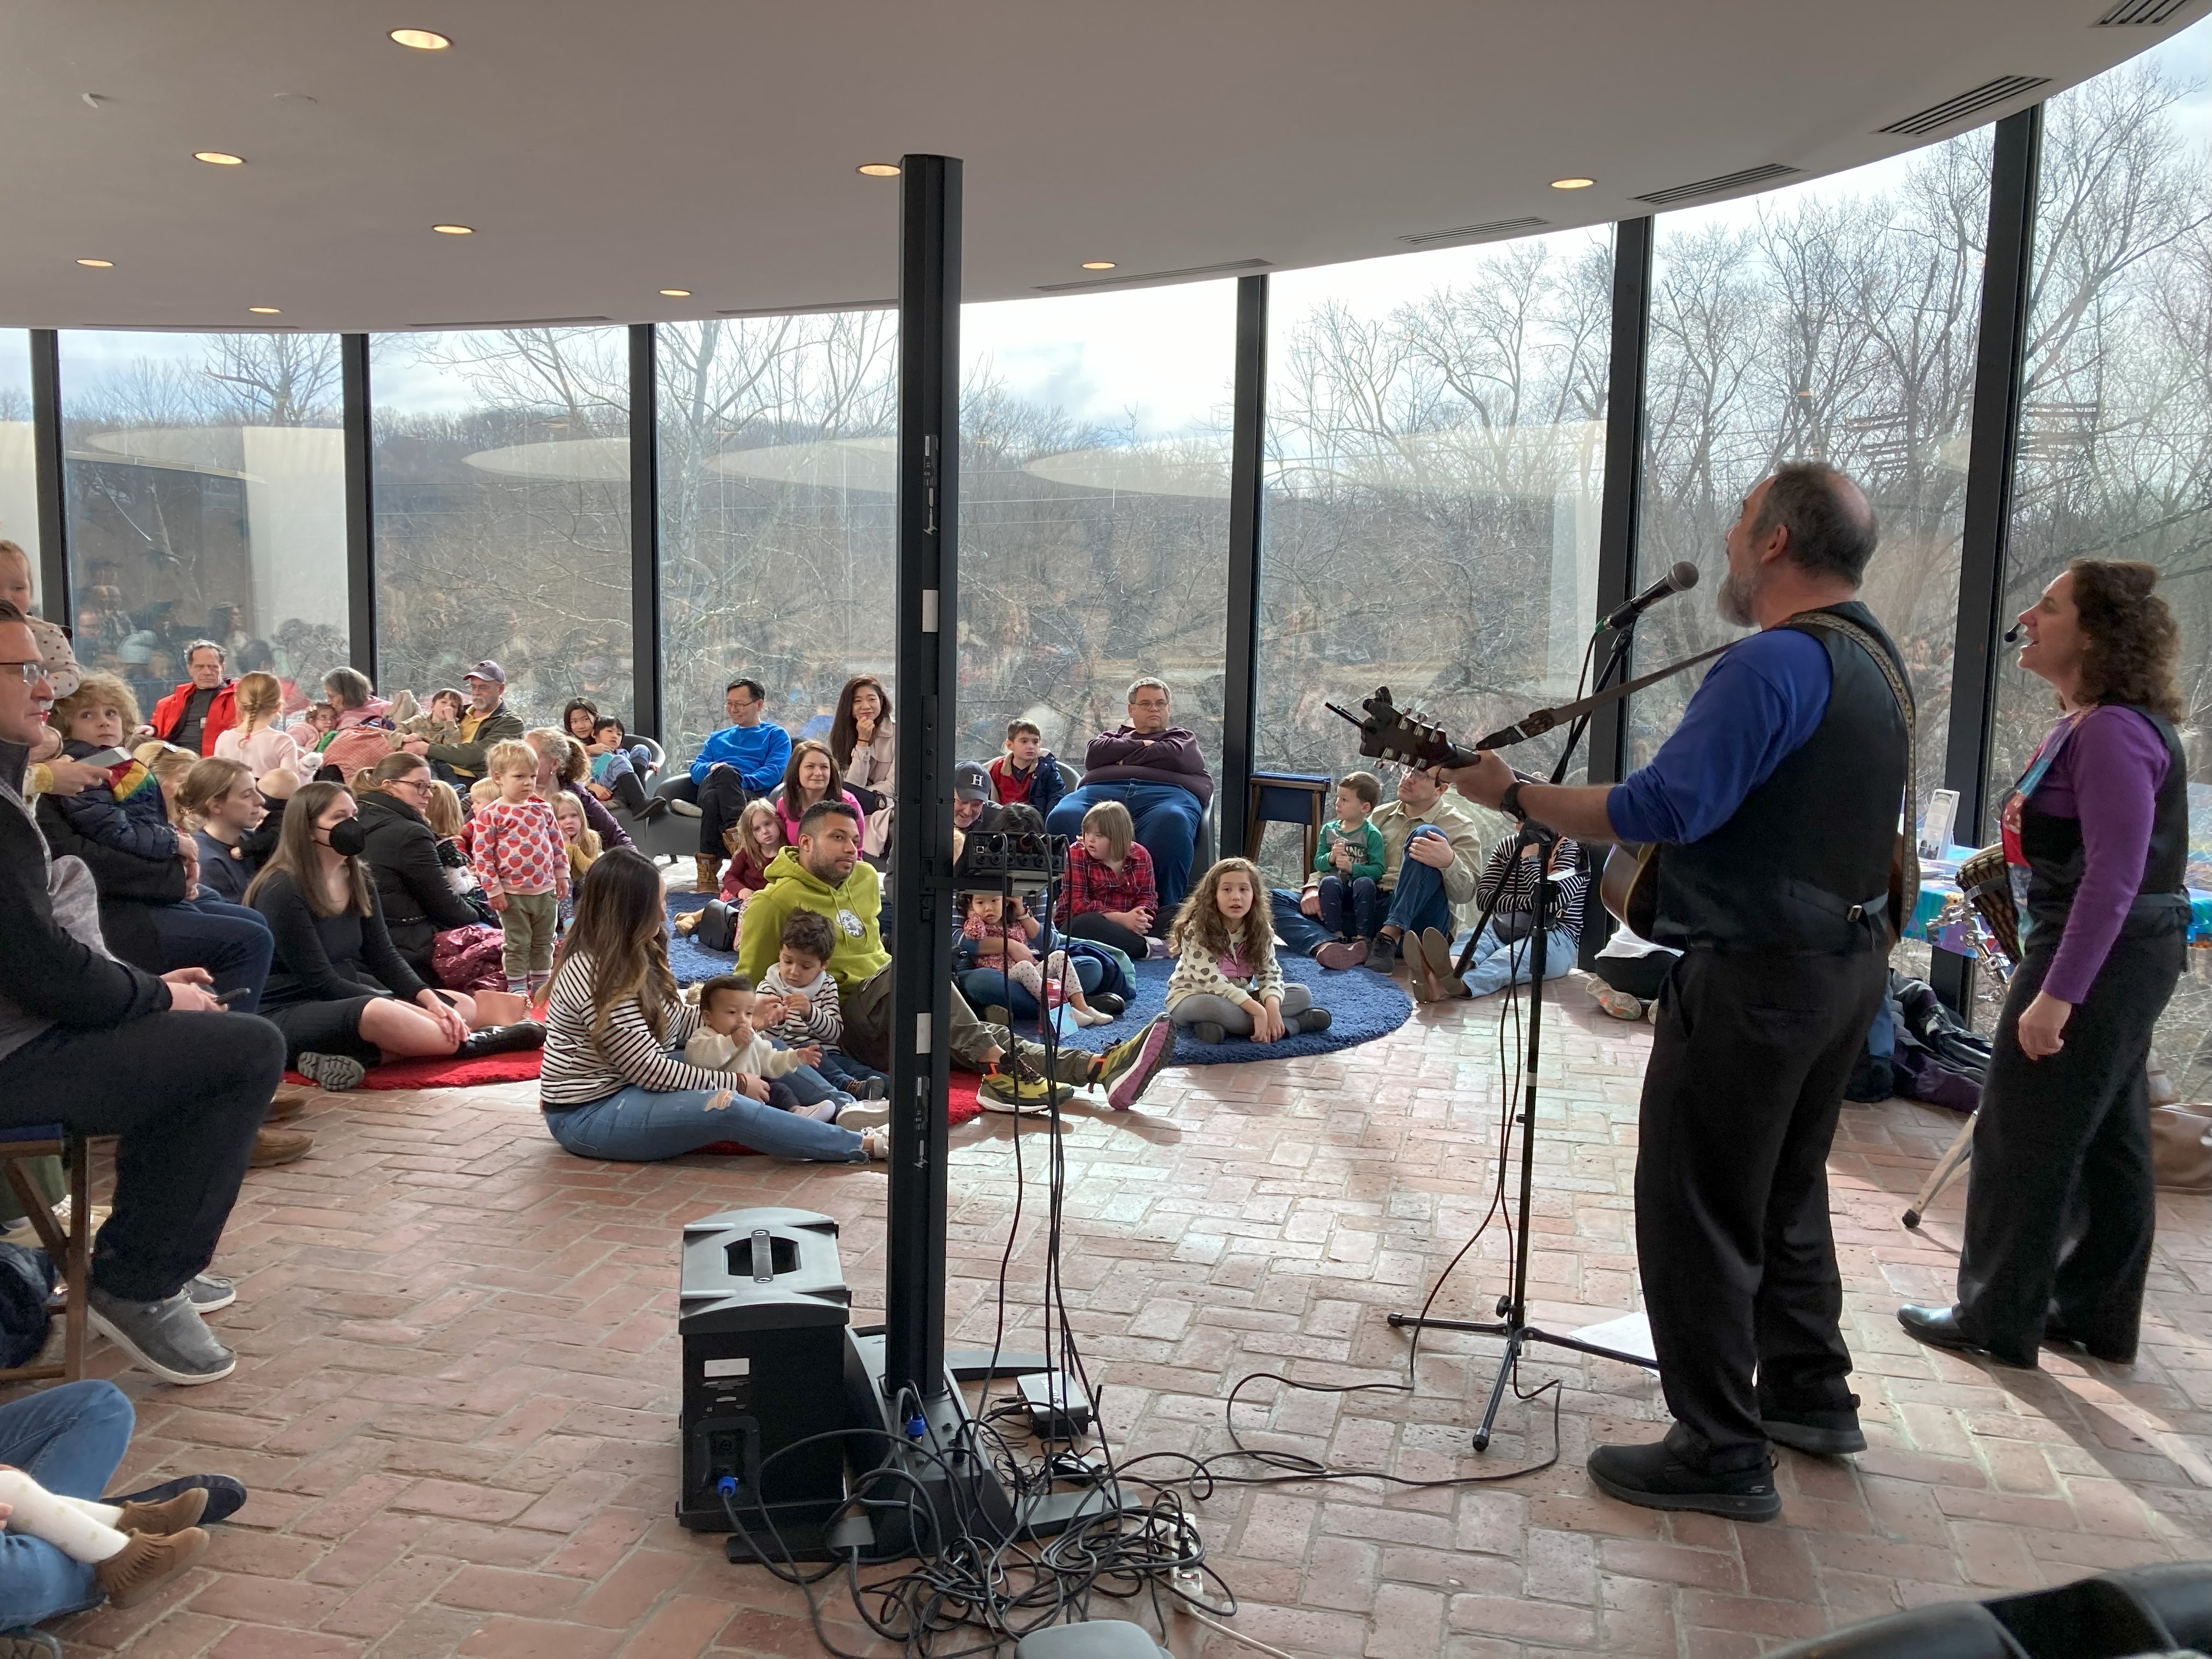 A man plays the guitar and sings in front of children and their families who are sitting on the floor watching.